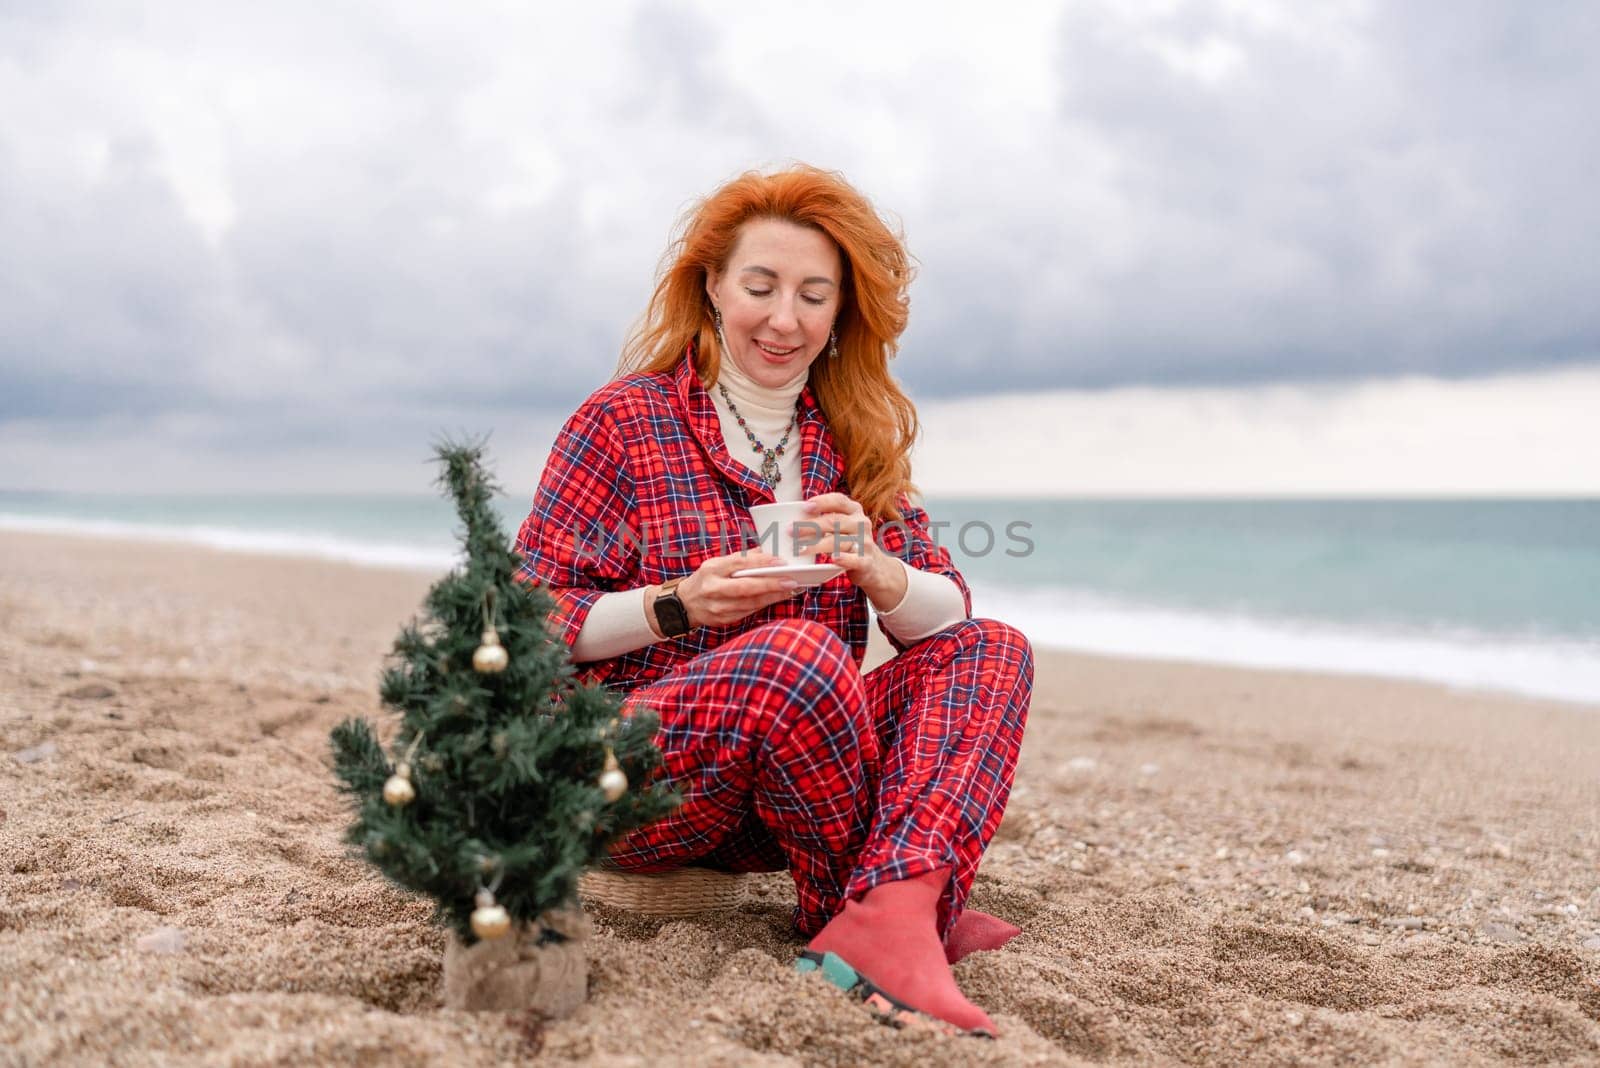 Sea Lady in plaid shirt with a mug in her hands enjoys beach with Christmas tree. Coastal area. Christmas, New Year holidays concep.